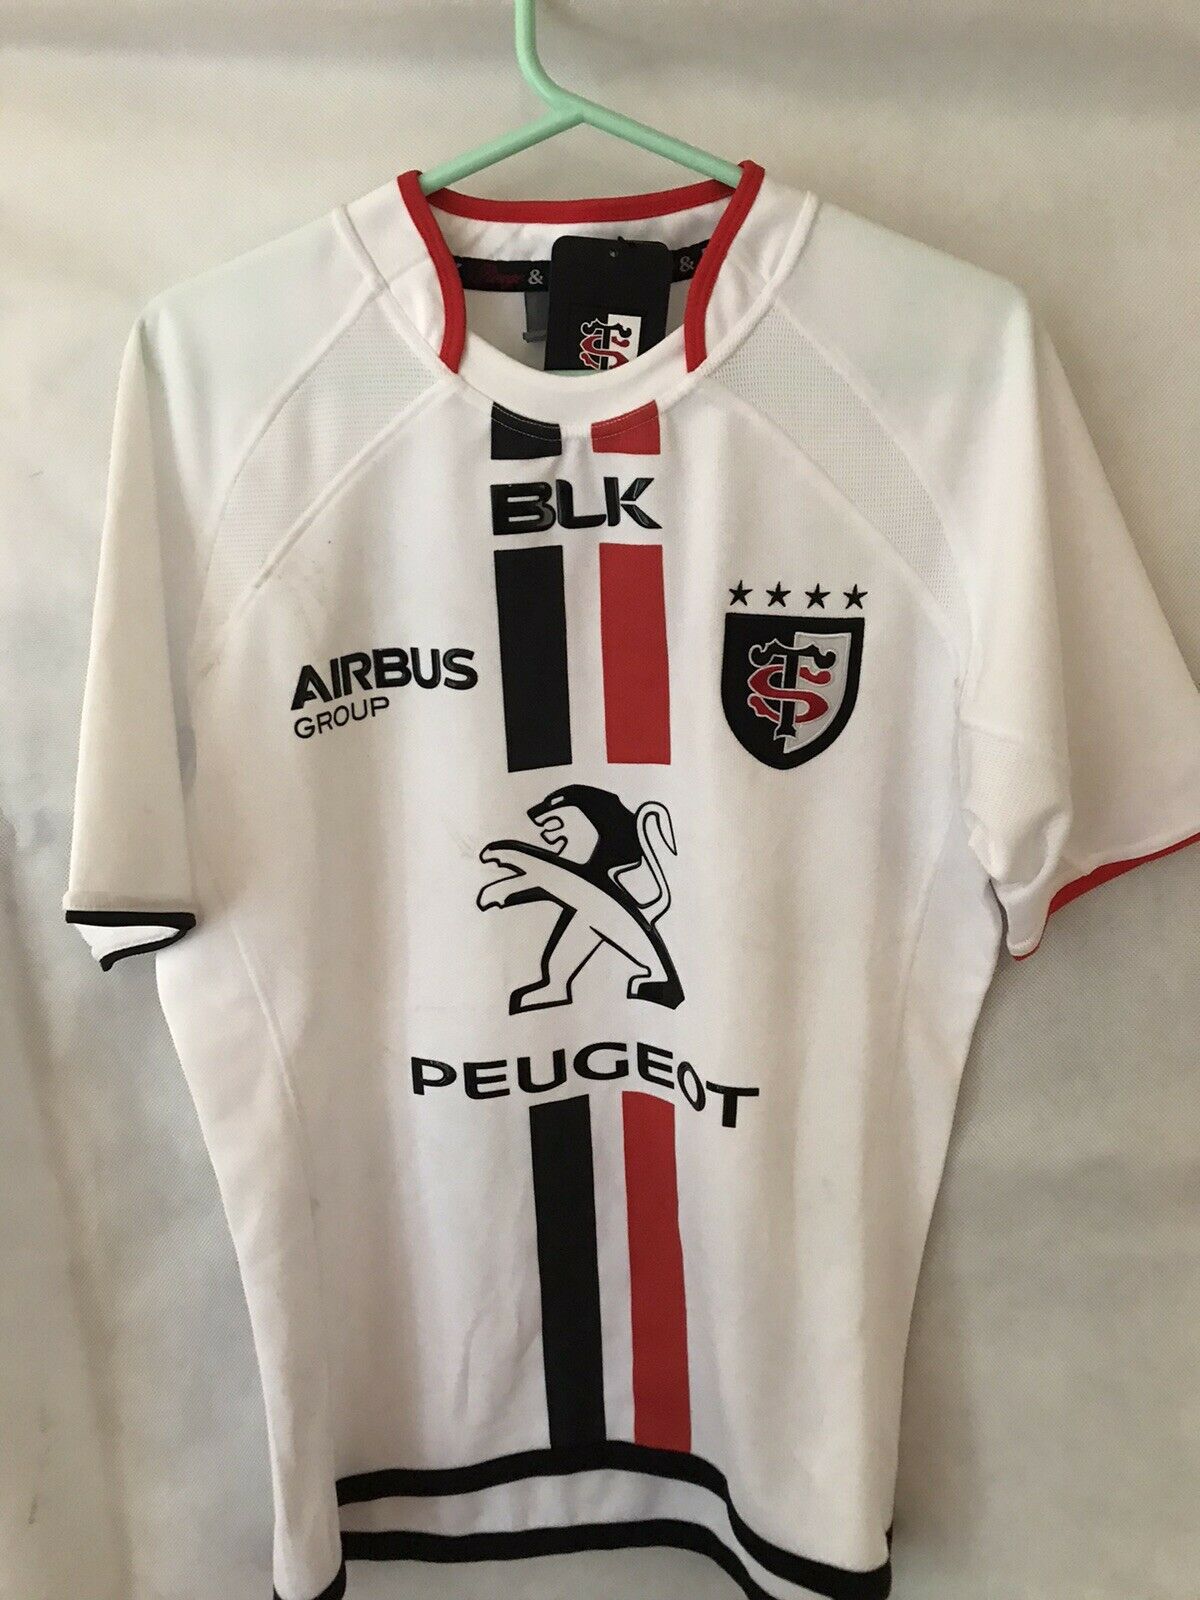 Touleuse Rugby Shirt - 42" Chest - Brand New - French Rugby